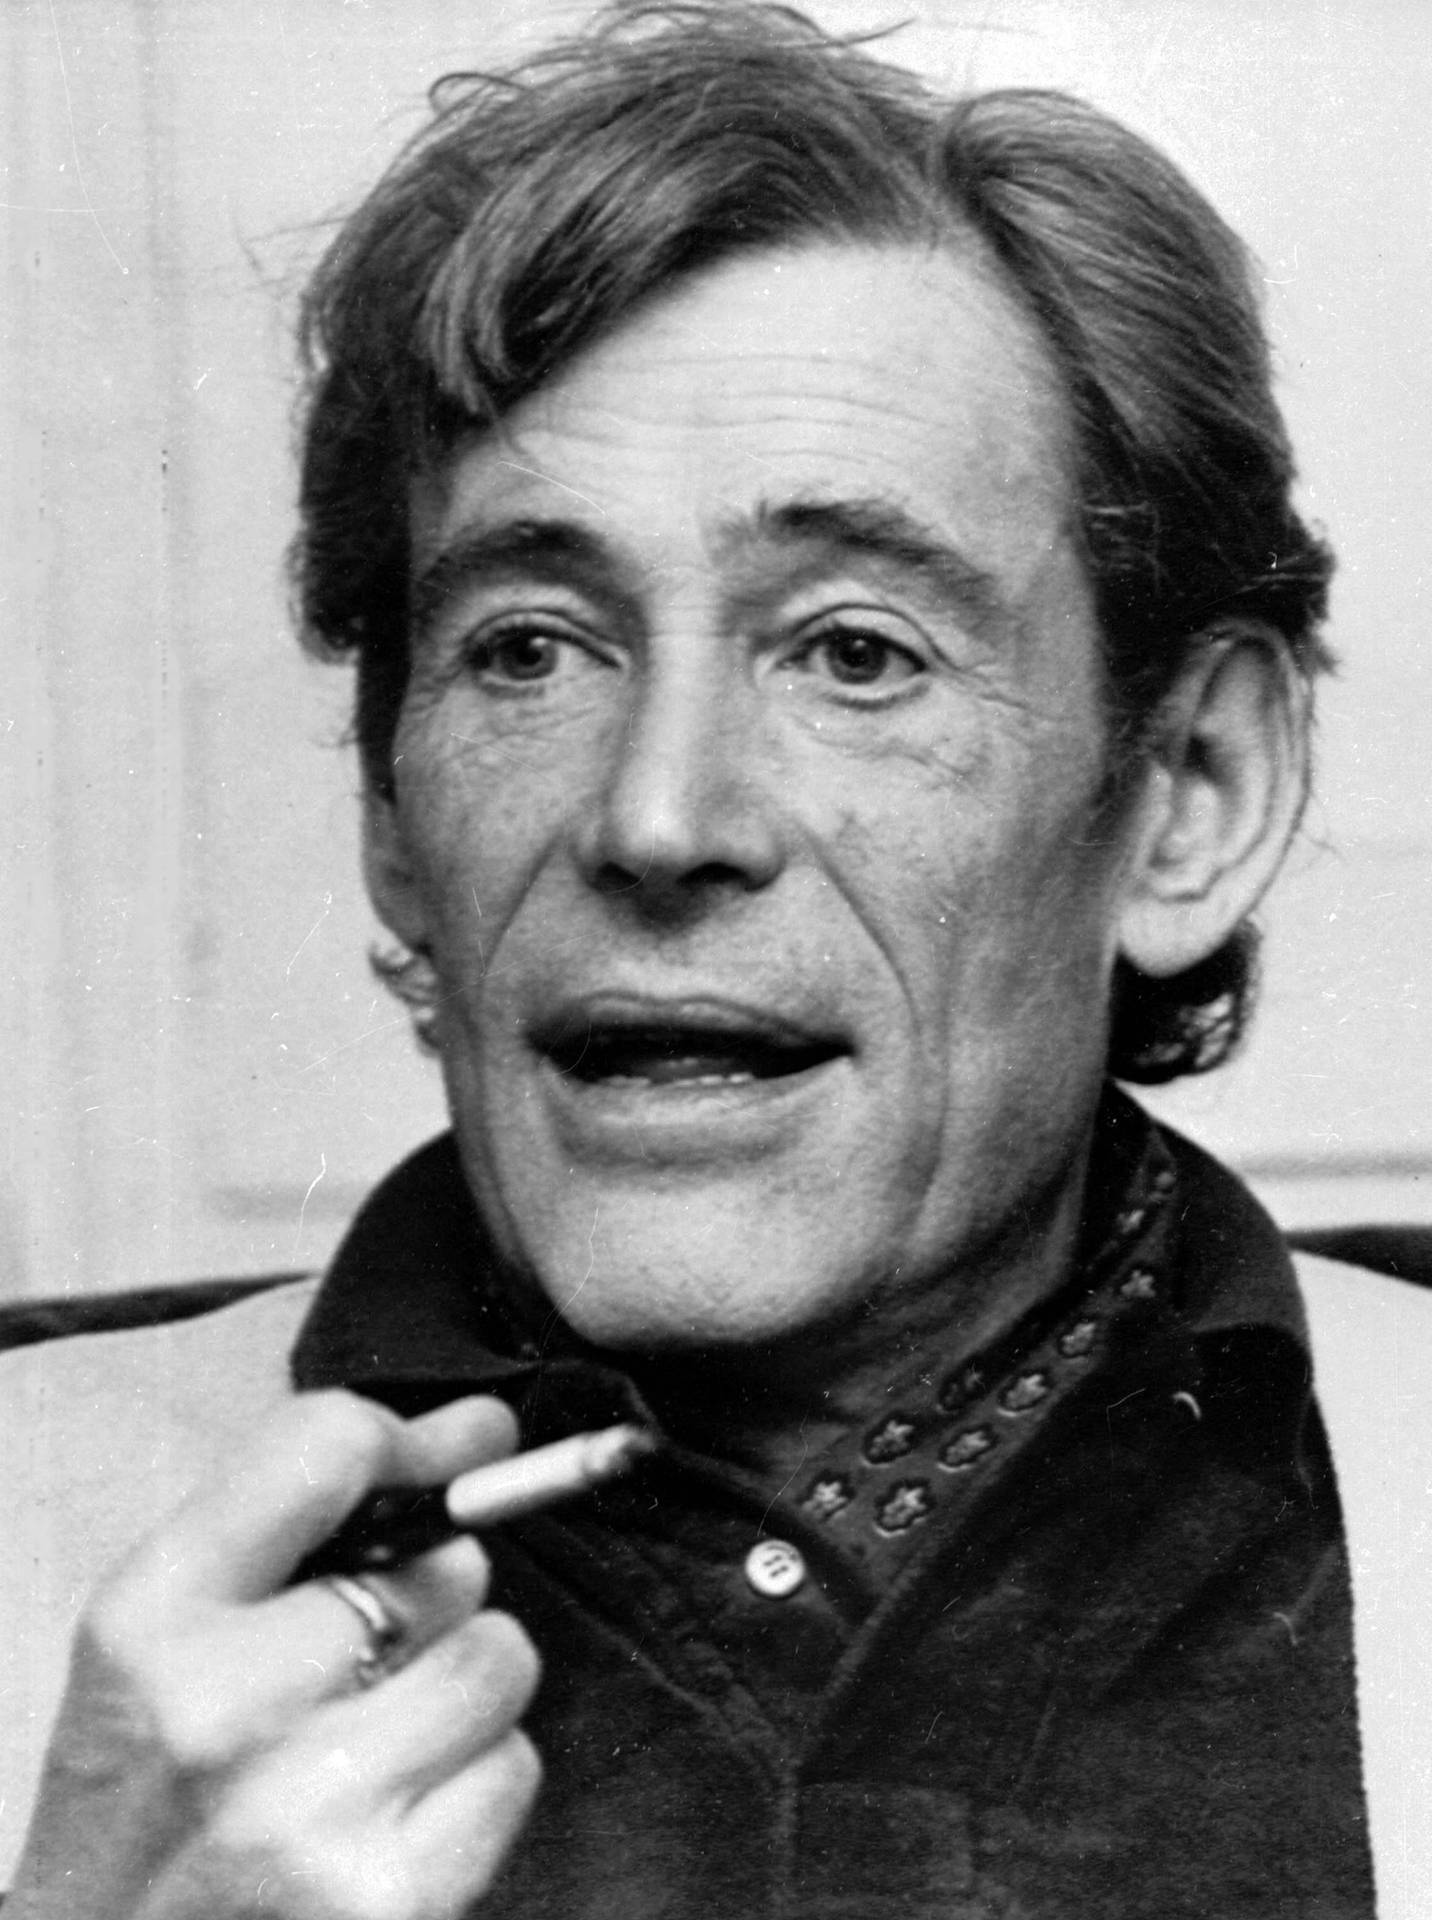 Caption: Classic Candid - Iconic British Actor Peter O'Toole in Mid-Interview Wallpaper